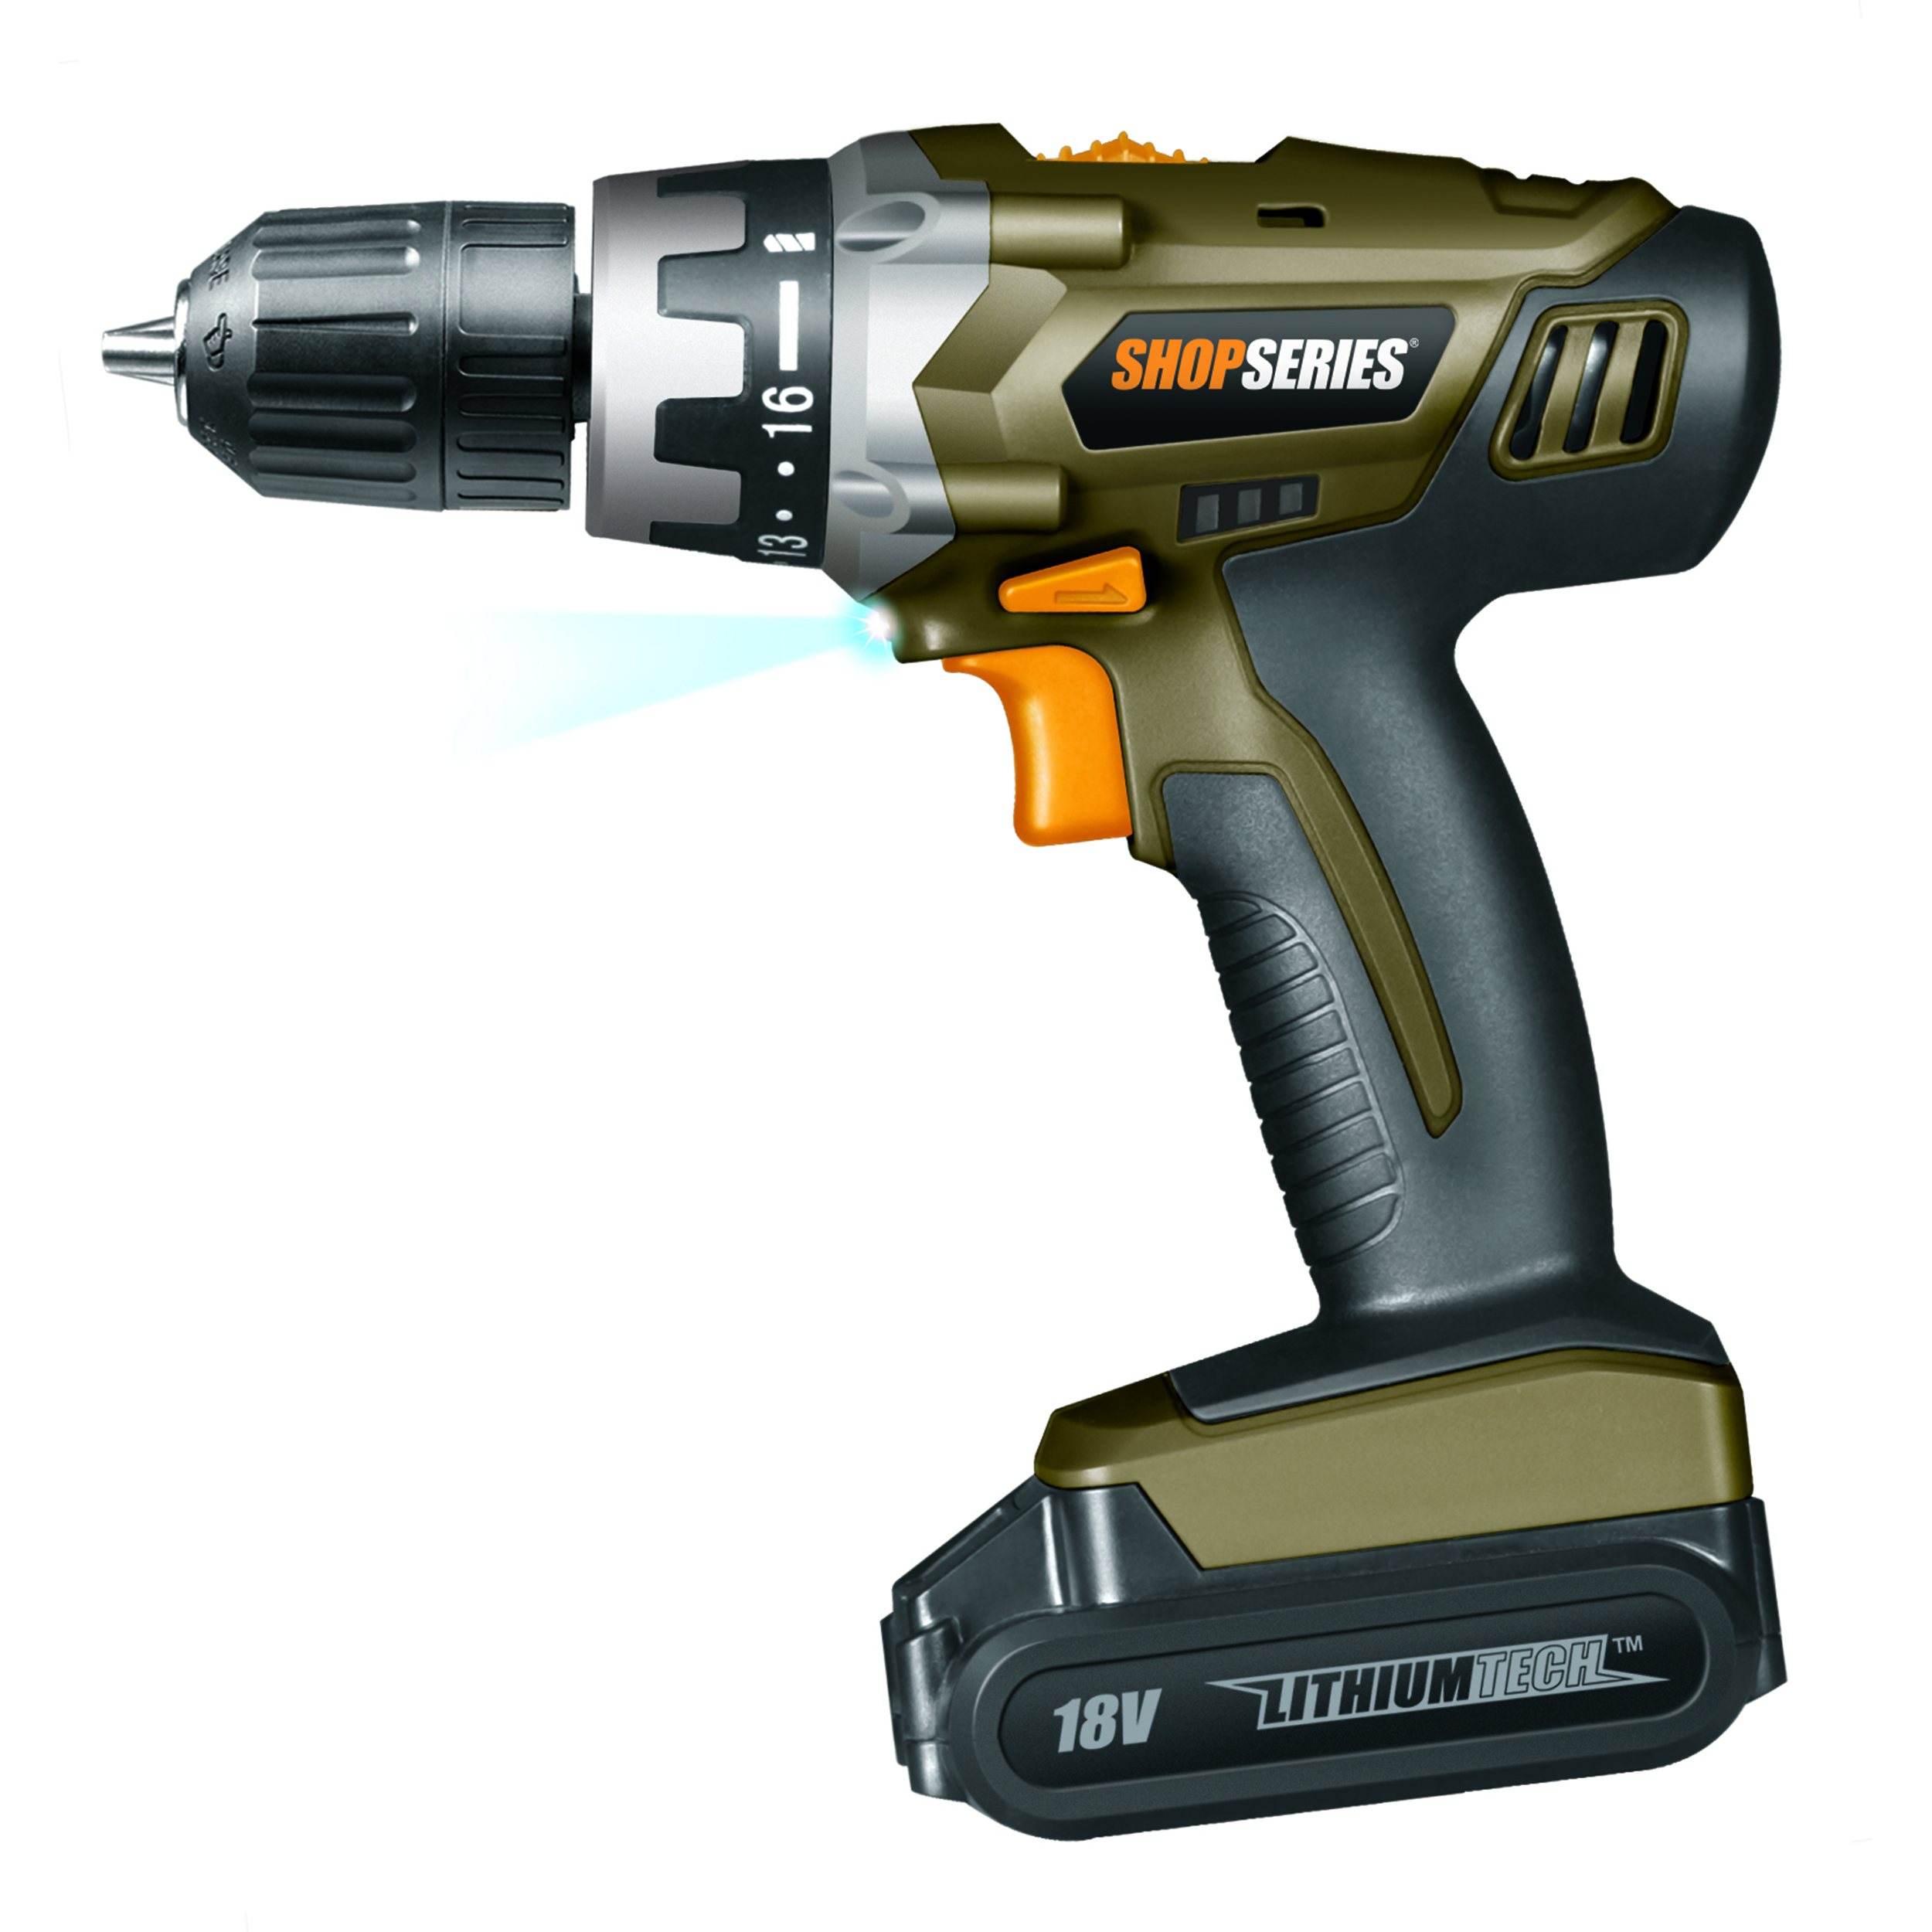 Shopseries 18v Lithium Drill With Battery, Model Ss2800